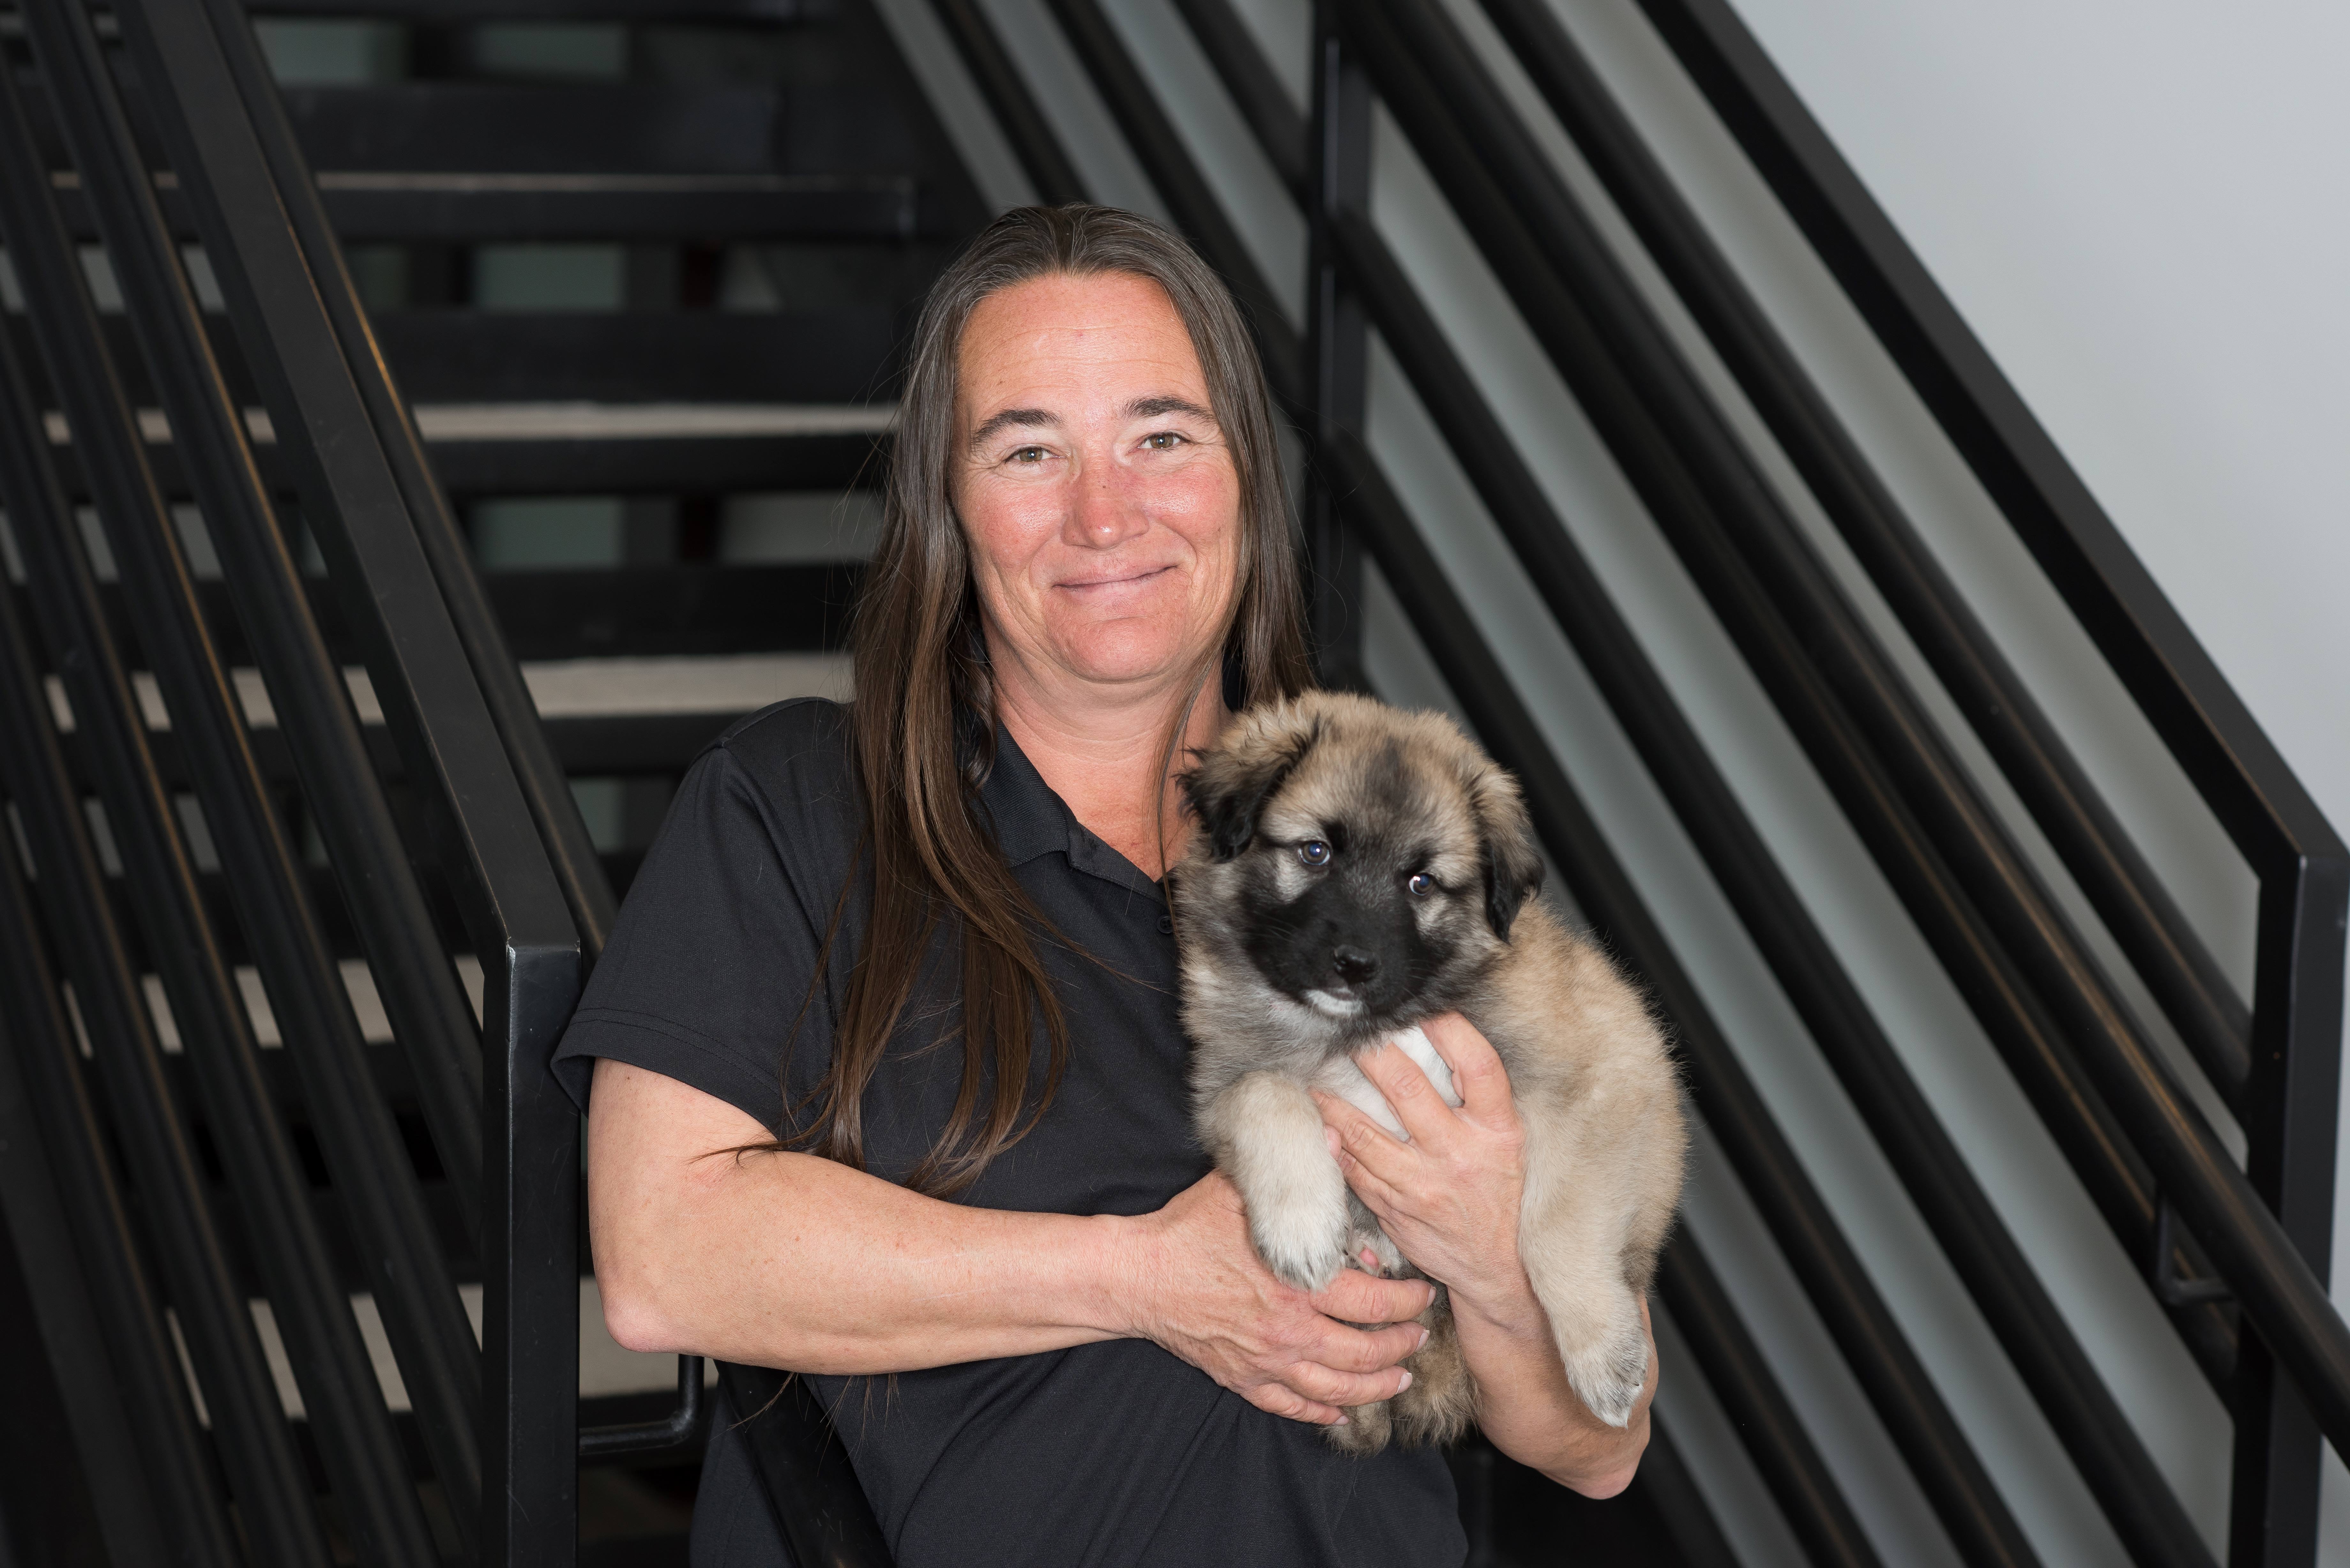 woman standing next to stairs holding a puppy and wearing a black shirt